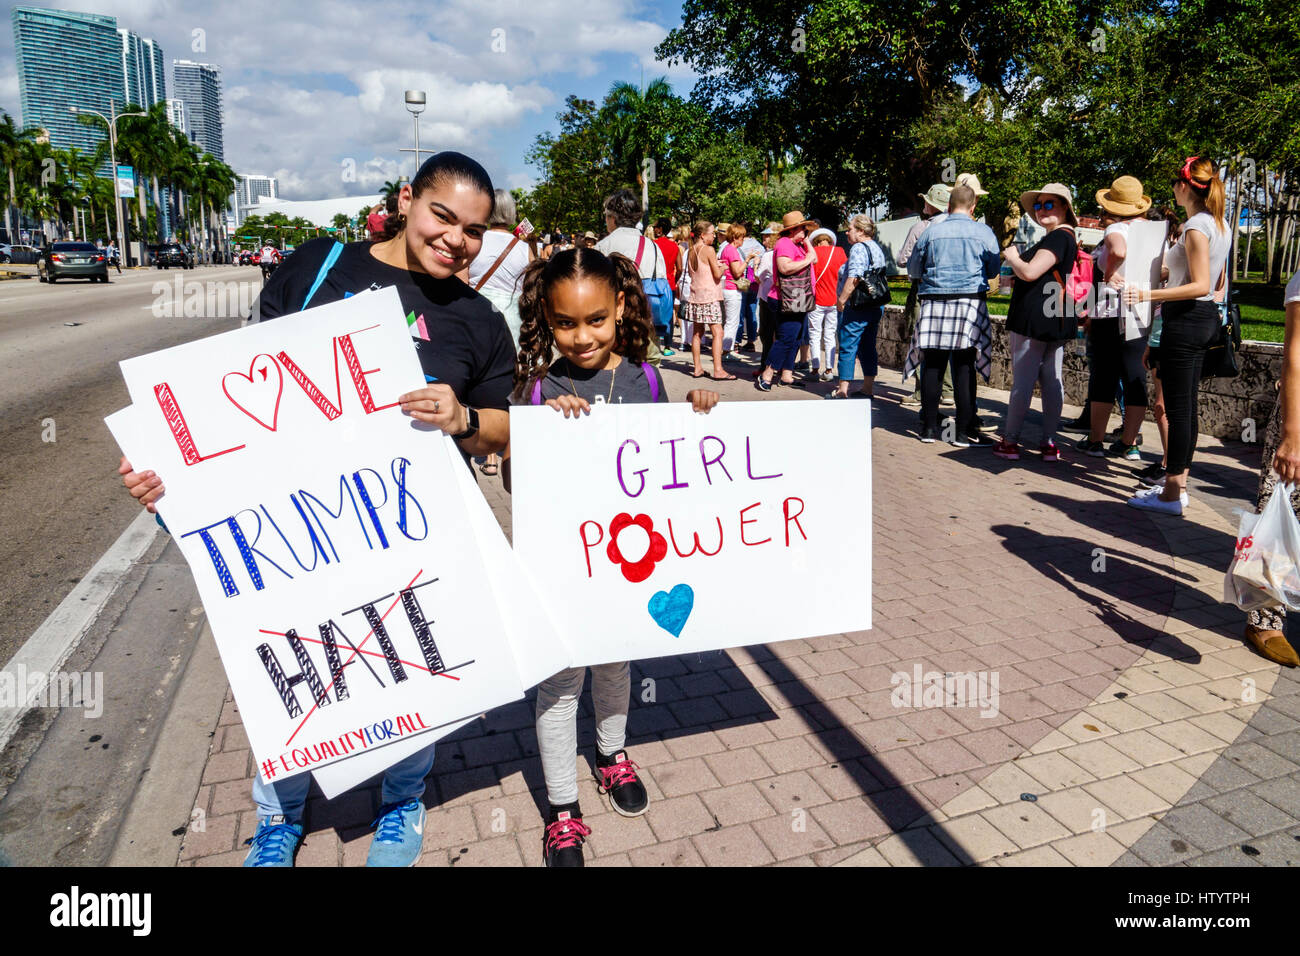 Miami Florida,Downtown,Bayfront Park,Women's March,political protest,march,human rights,advocacy,sign,Black woman female women,girl girls,kid kids chi Stock Photo